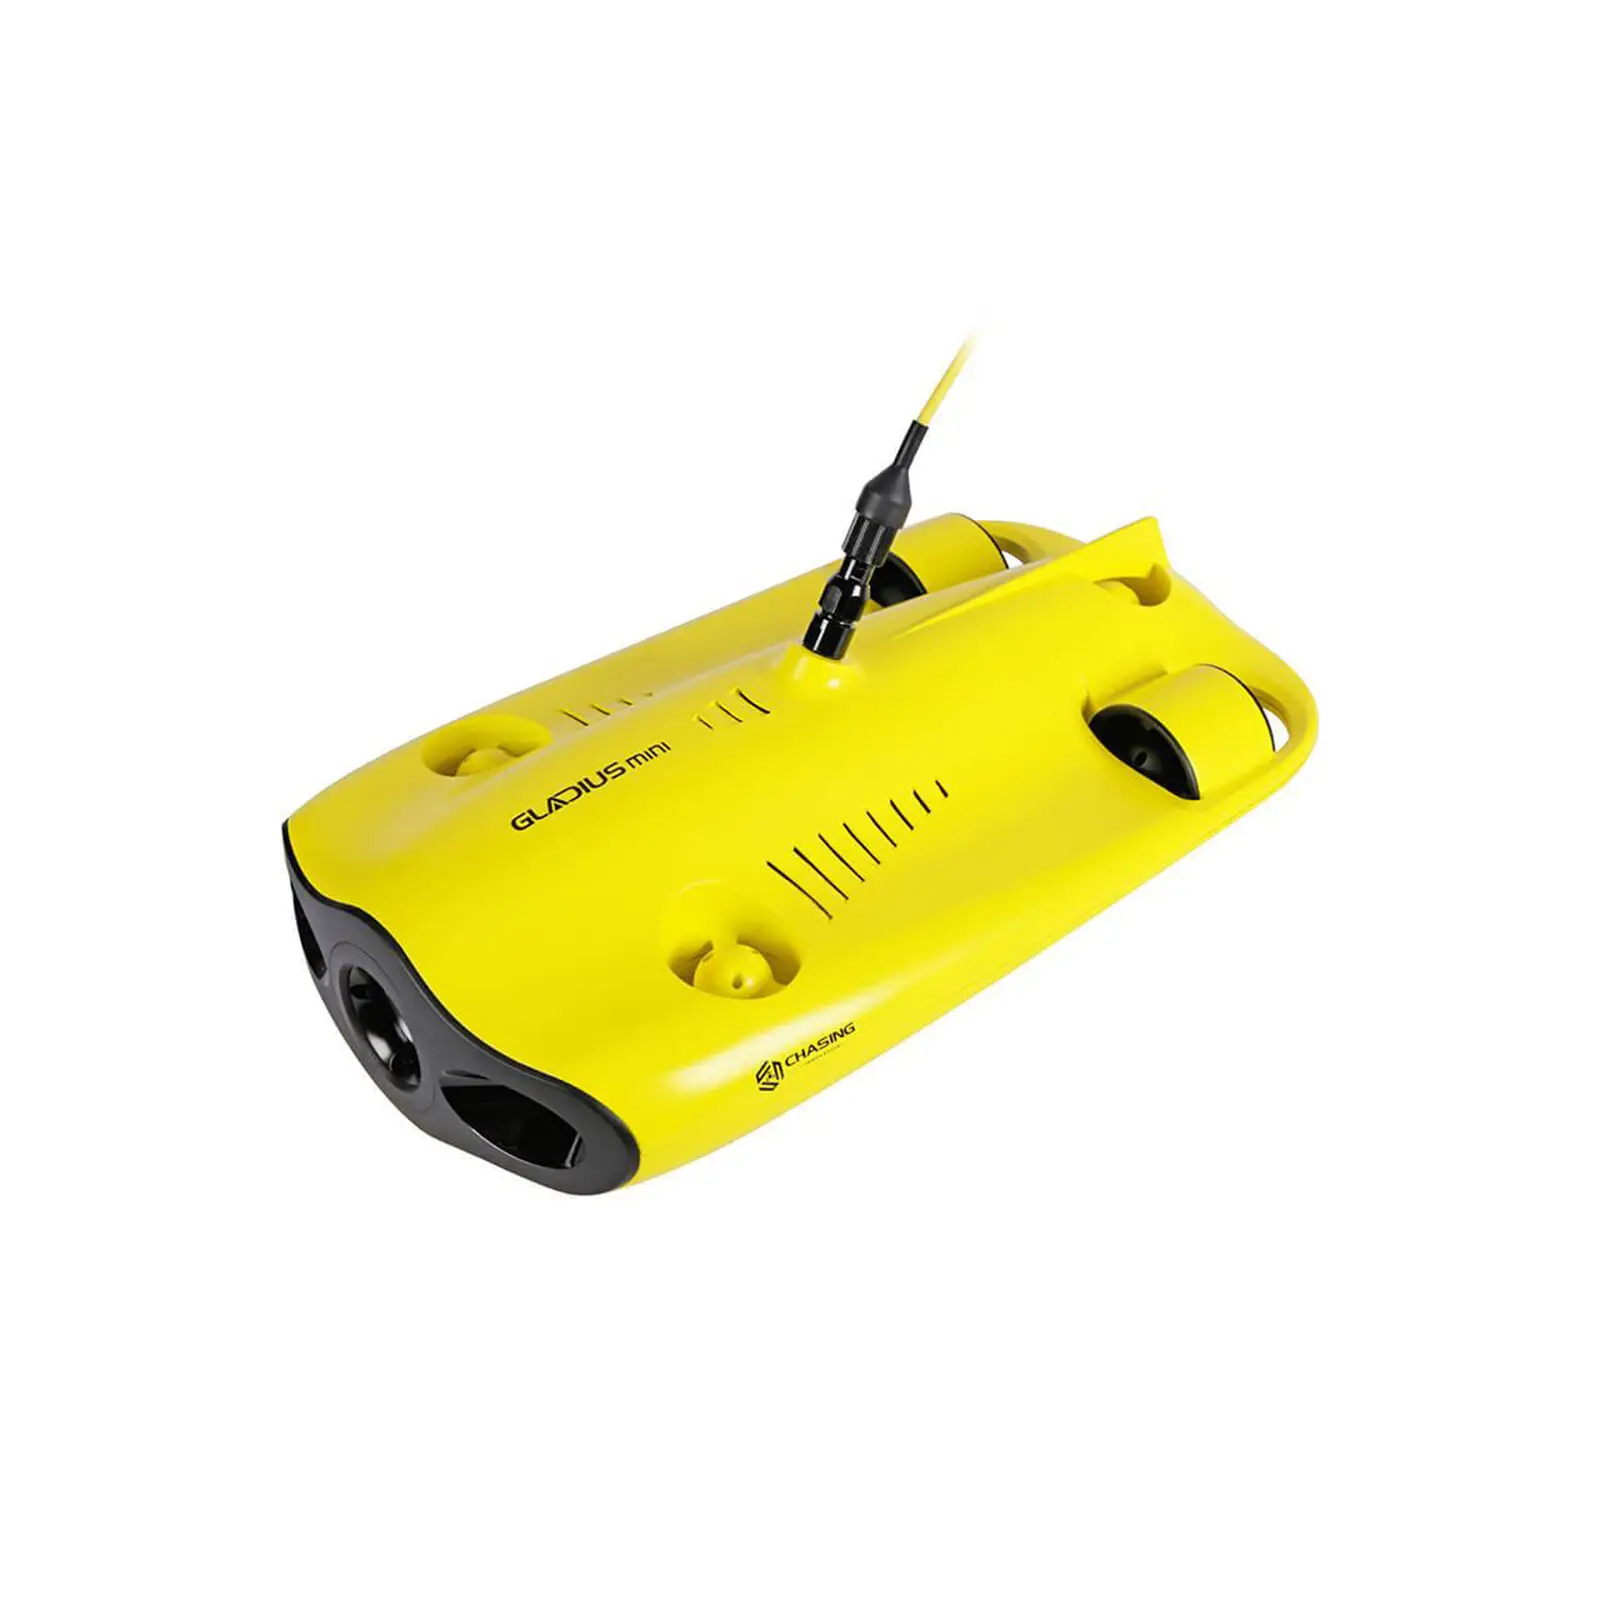 

CHASING GLADIUS MINI with backpack underwater drone ROV robot 4K UHD camera 100 meters depth for fishing and diving, Yellow